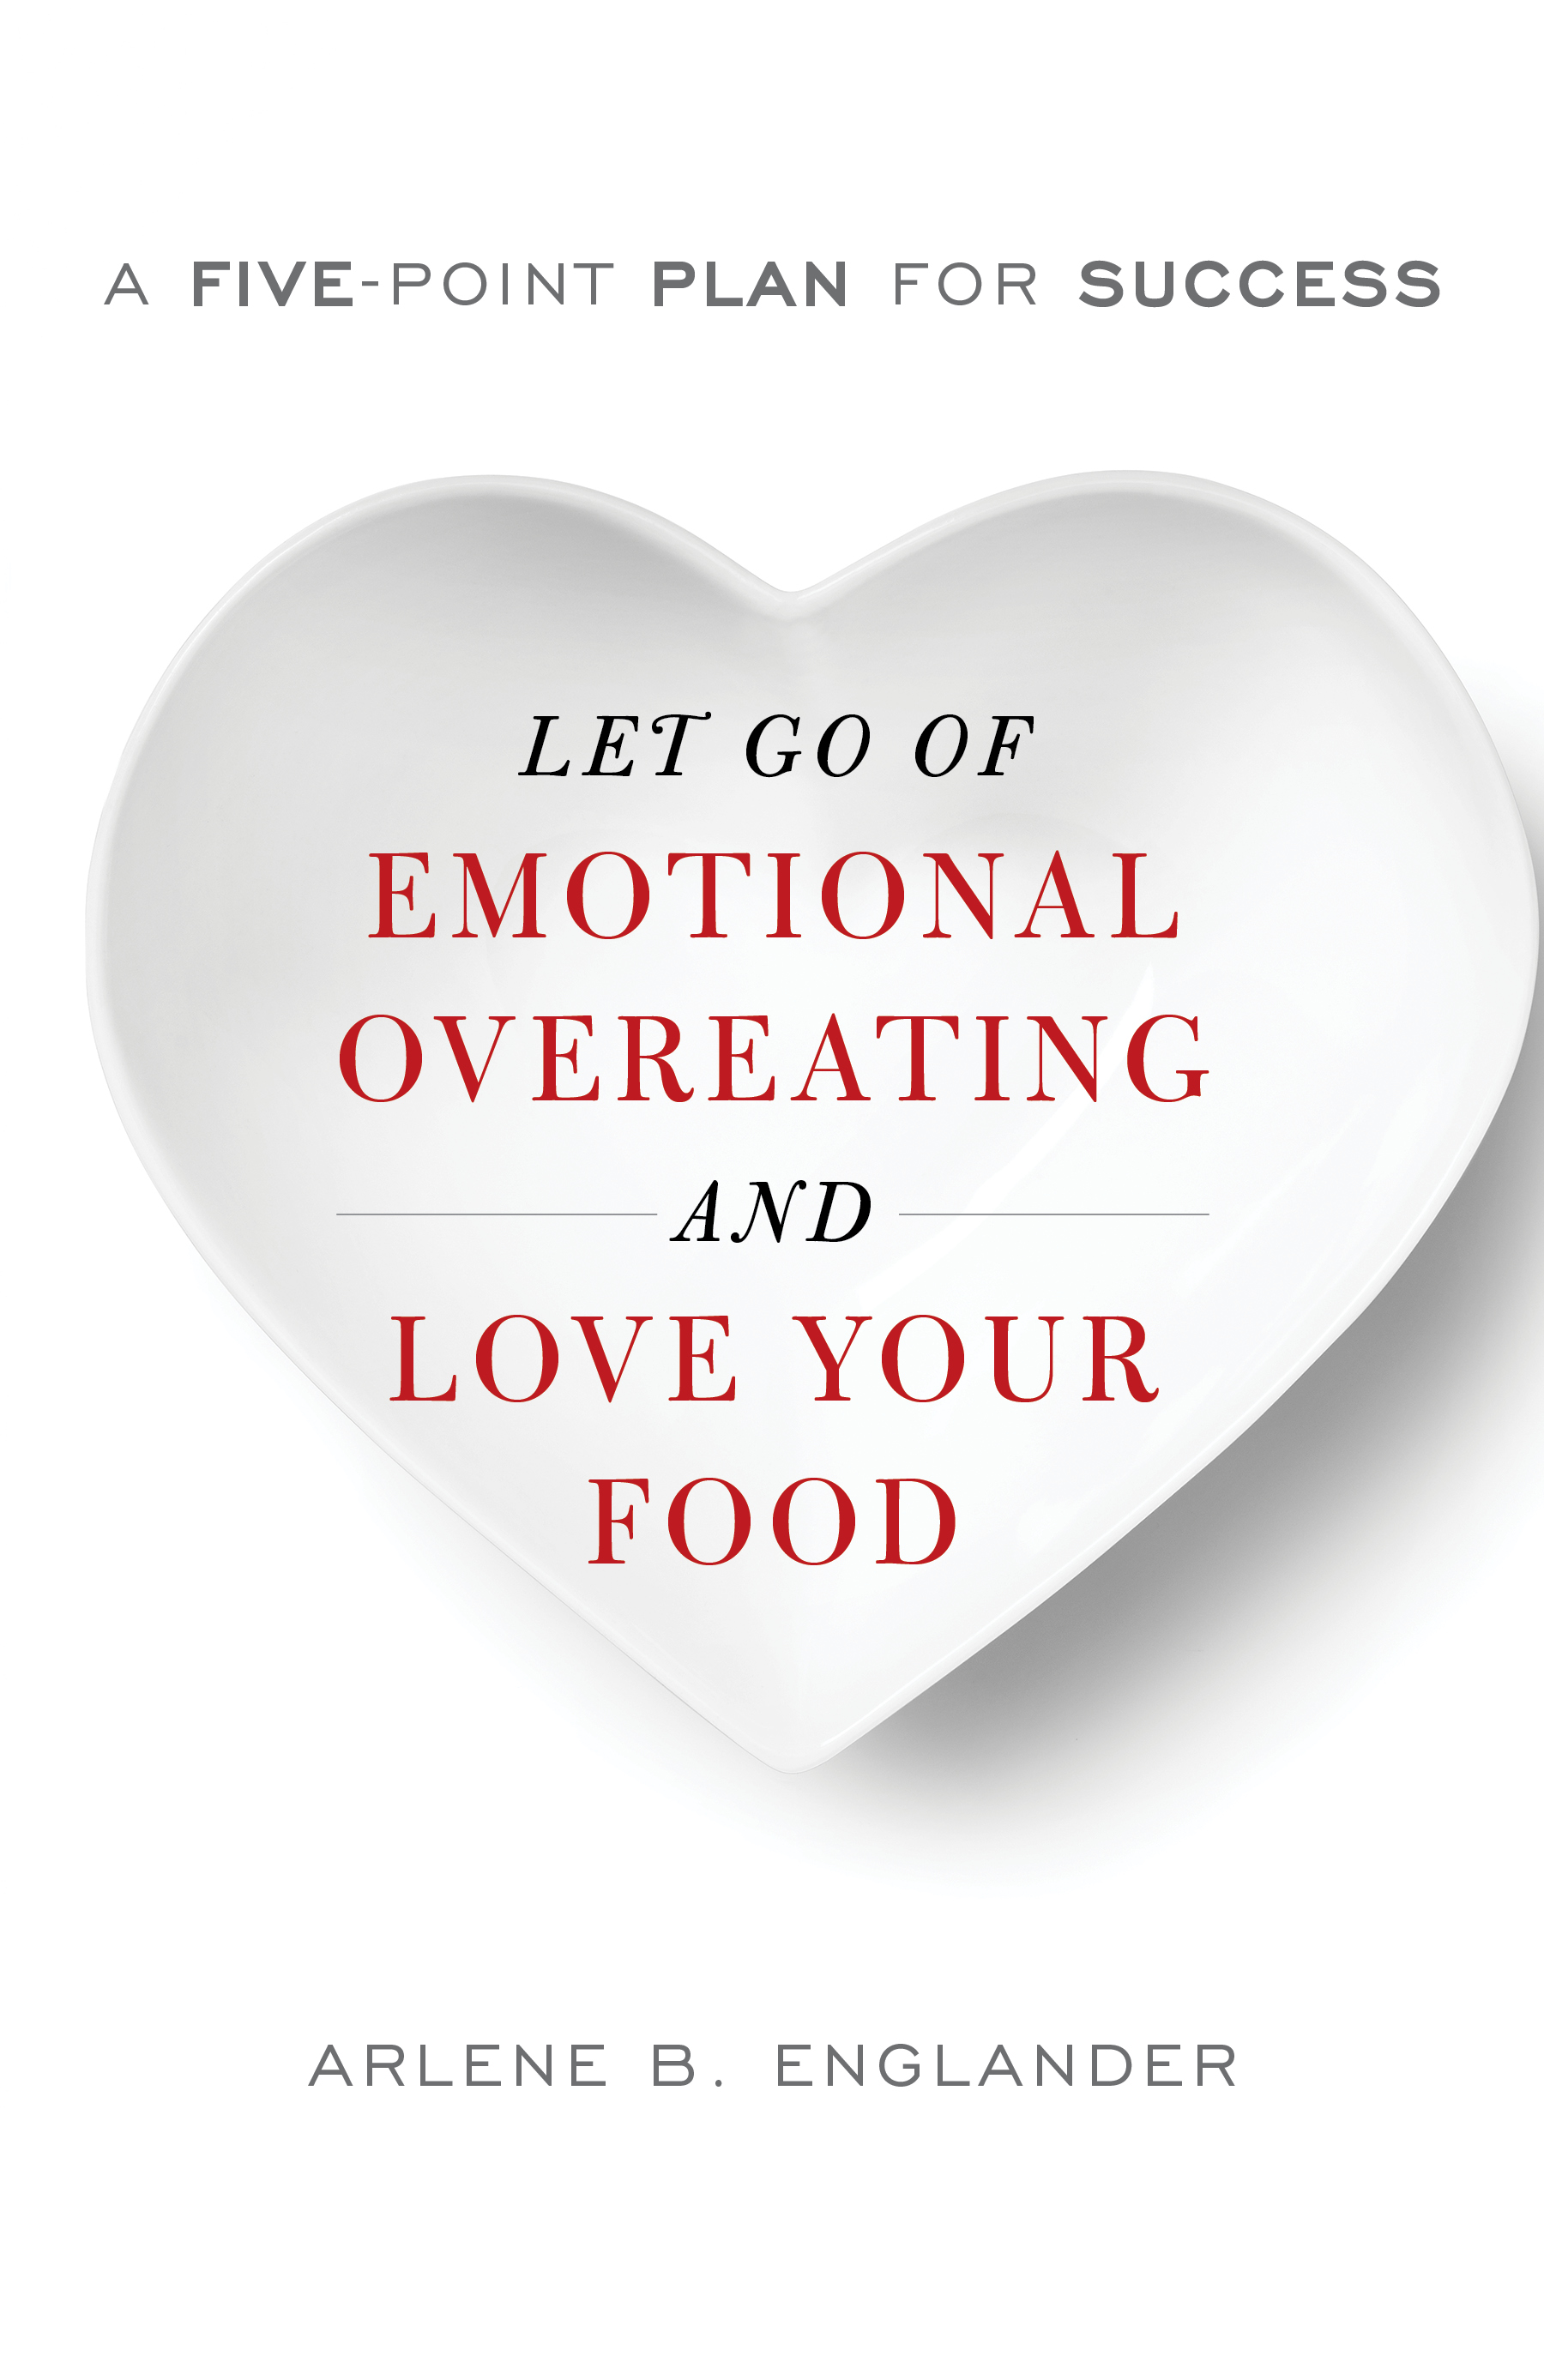 Let Go of Emotional Overeating and Love Your Food: A Five-Point Plan for Success